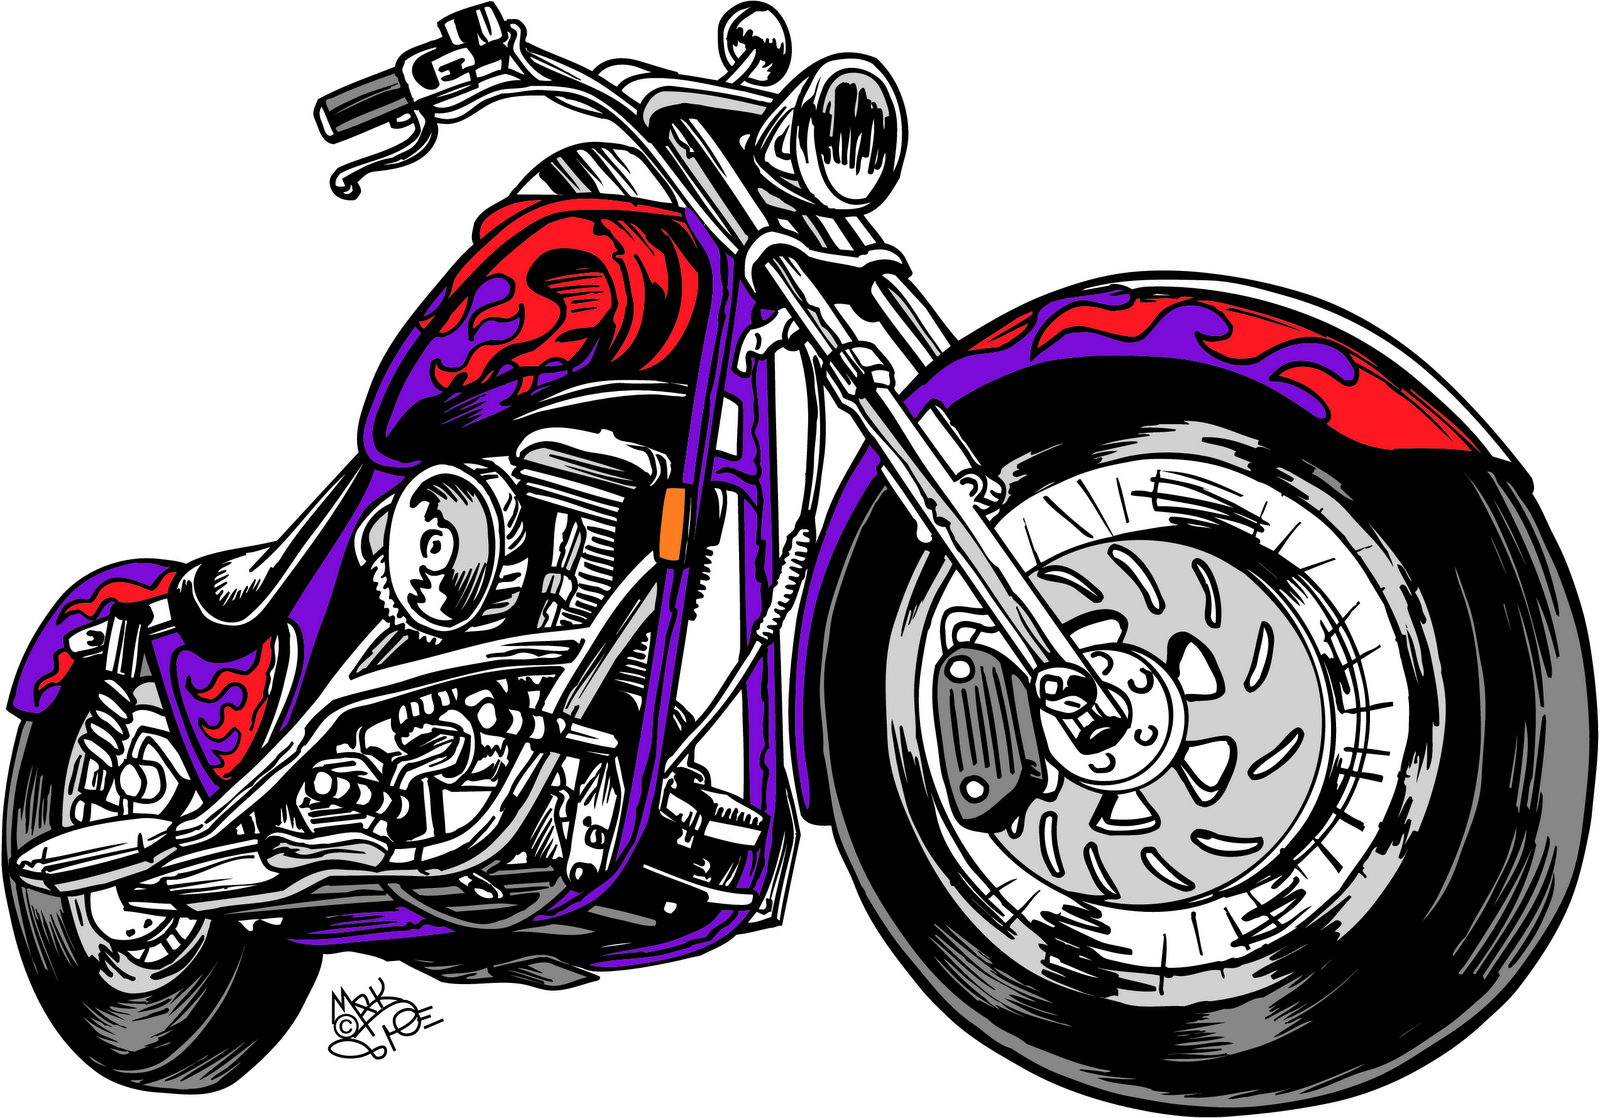 Motorcycle  black and white motorcycle clipart black and white free 2 2